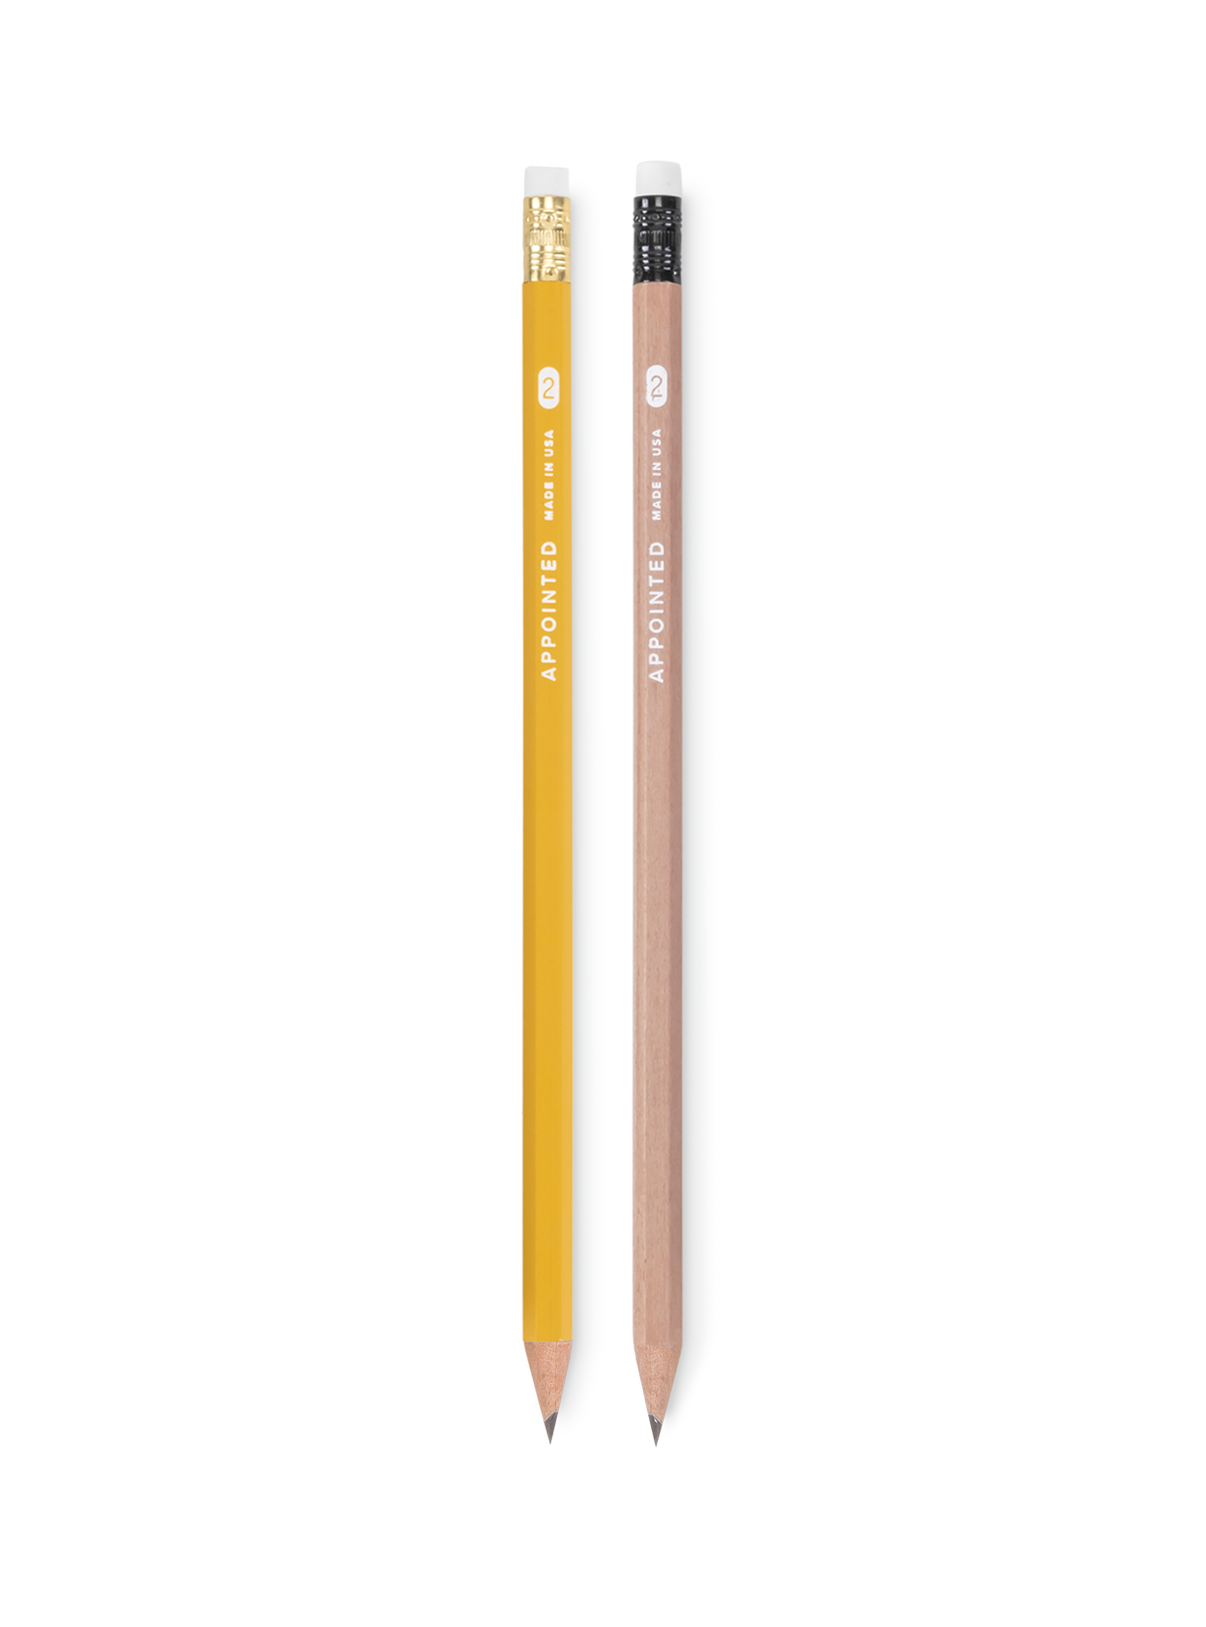 Appointed No. 2 Pencils with Erasers